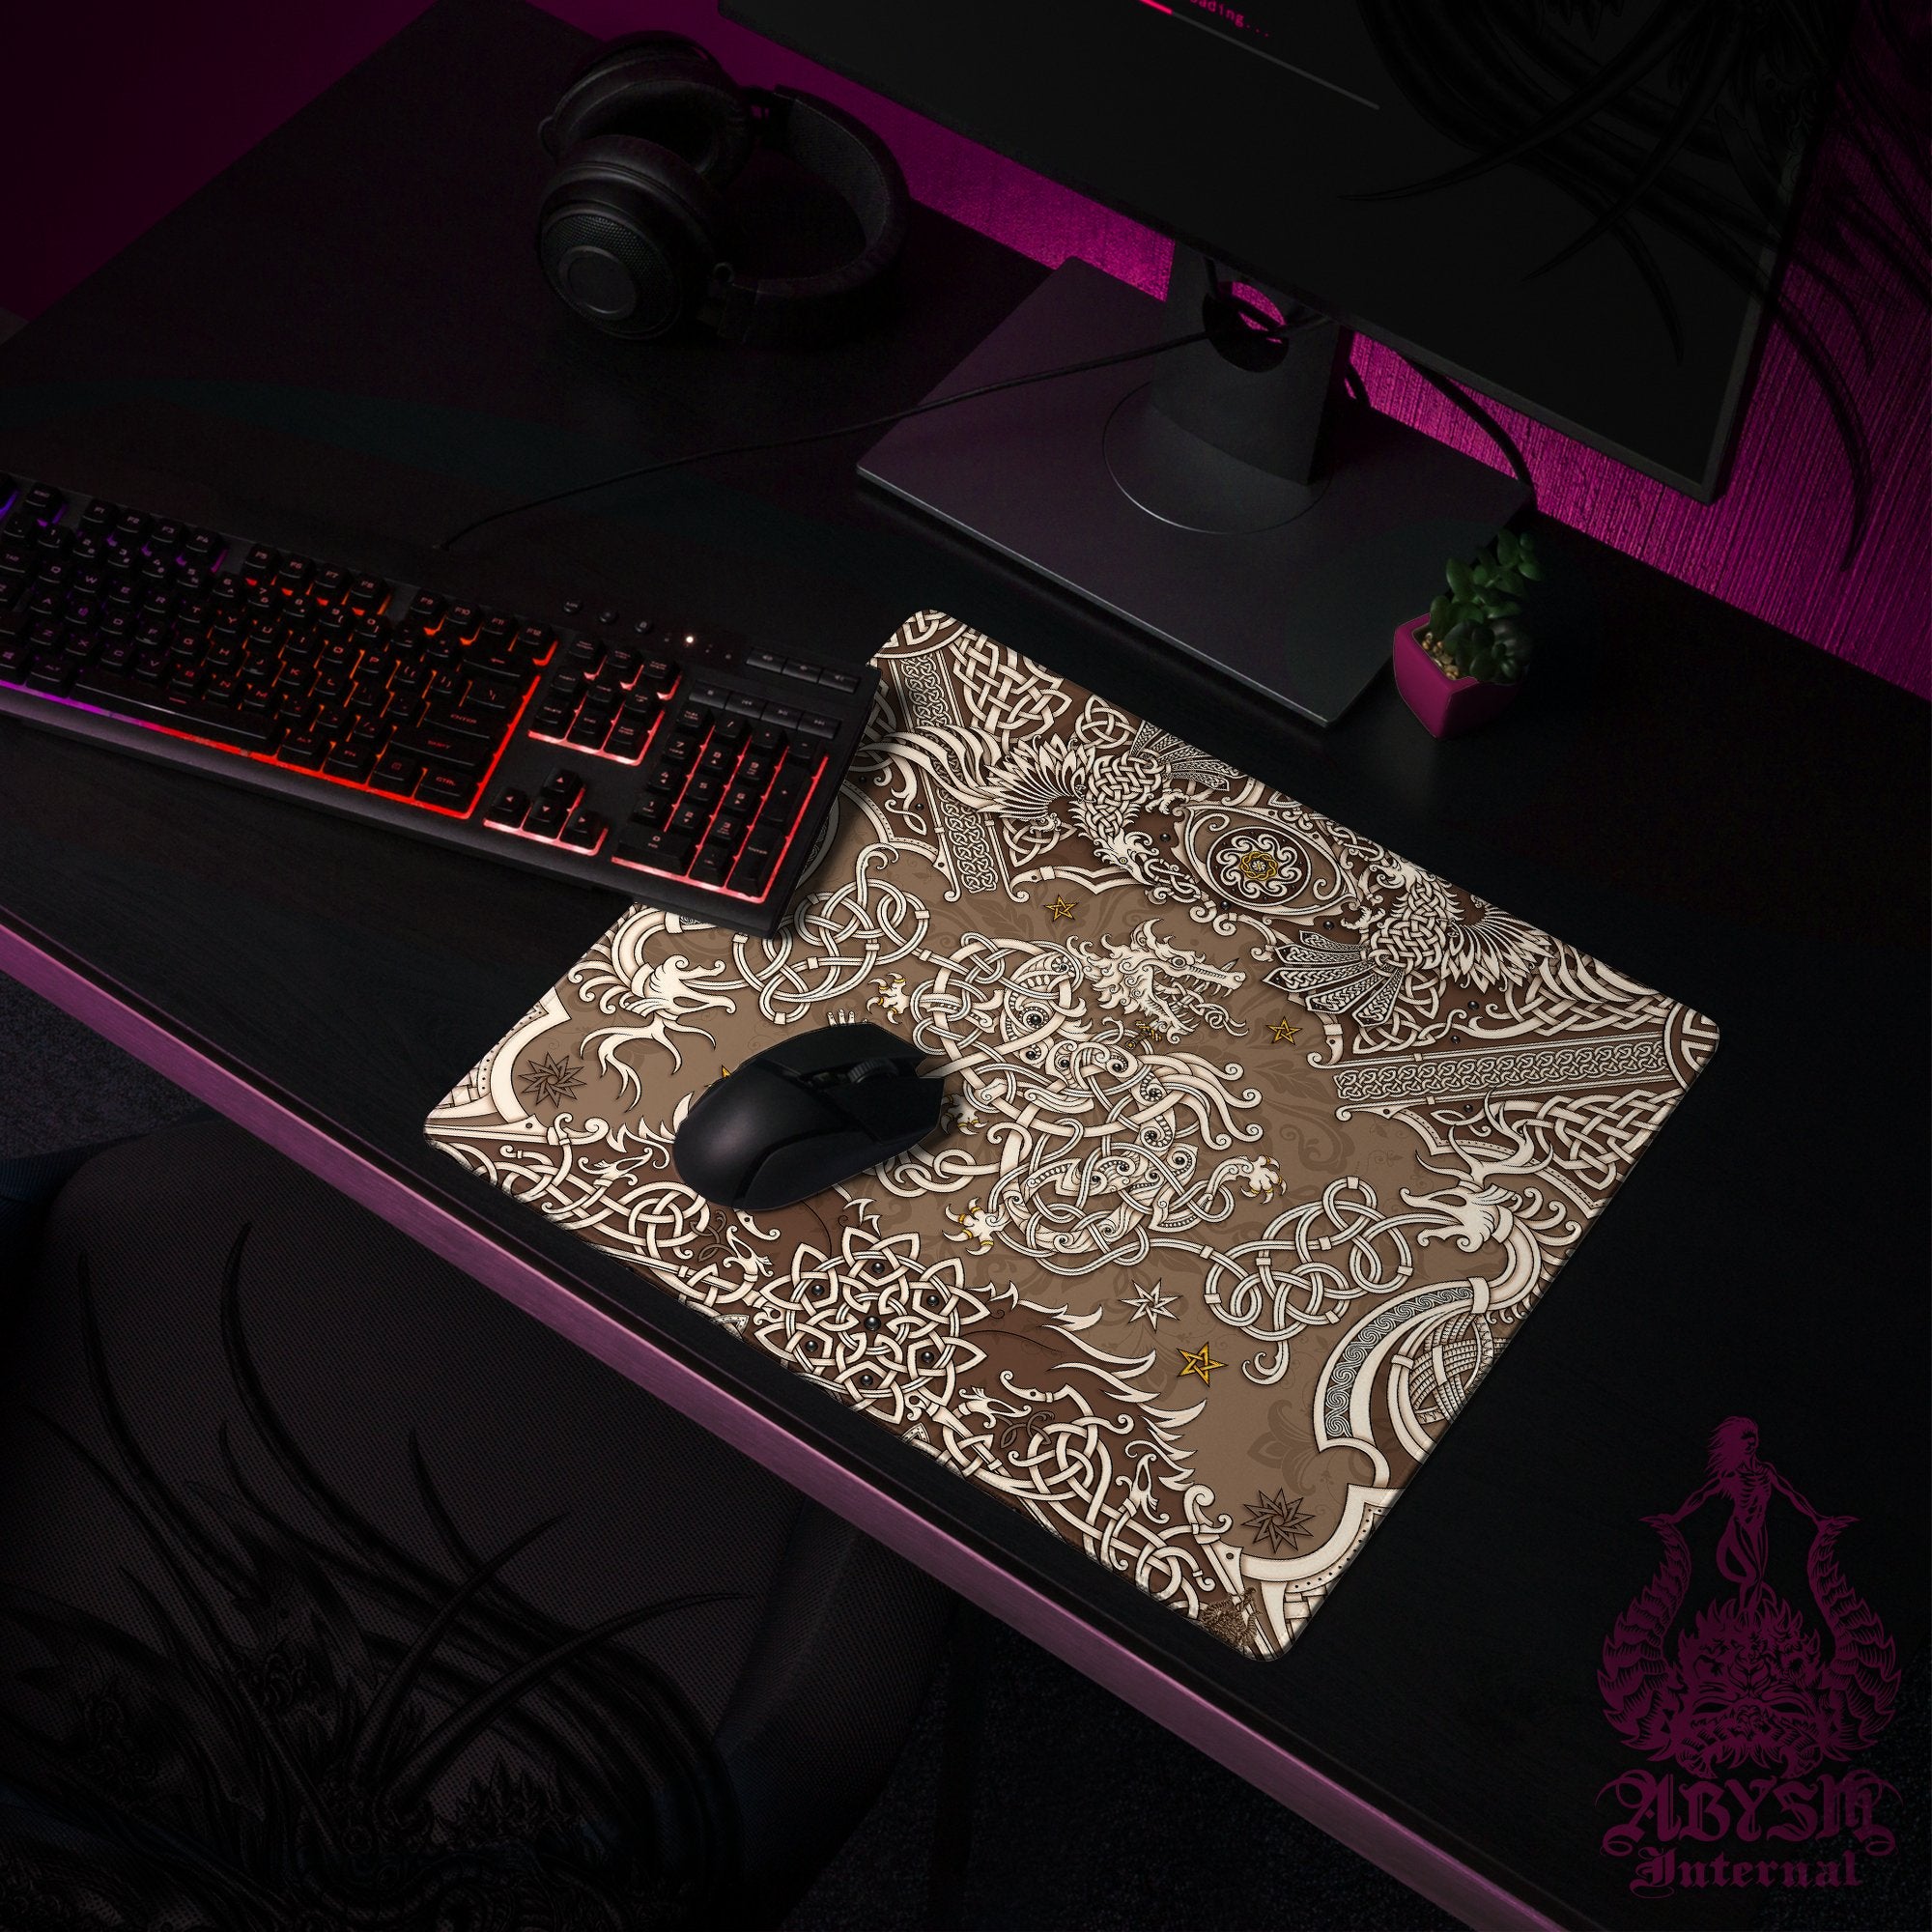 Viking Mouse Pad, Fenrir Gaming Desk Mat, Nordic Wolf Workpad, Norse Knotwork Table Protector Cover, Art Print - Cream - Abysm Internal